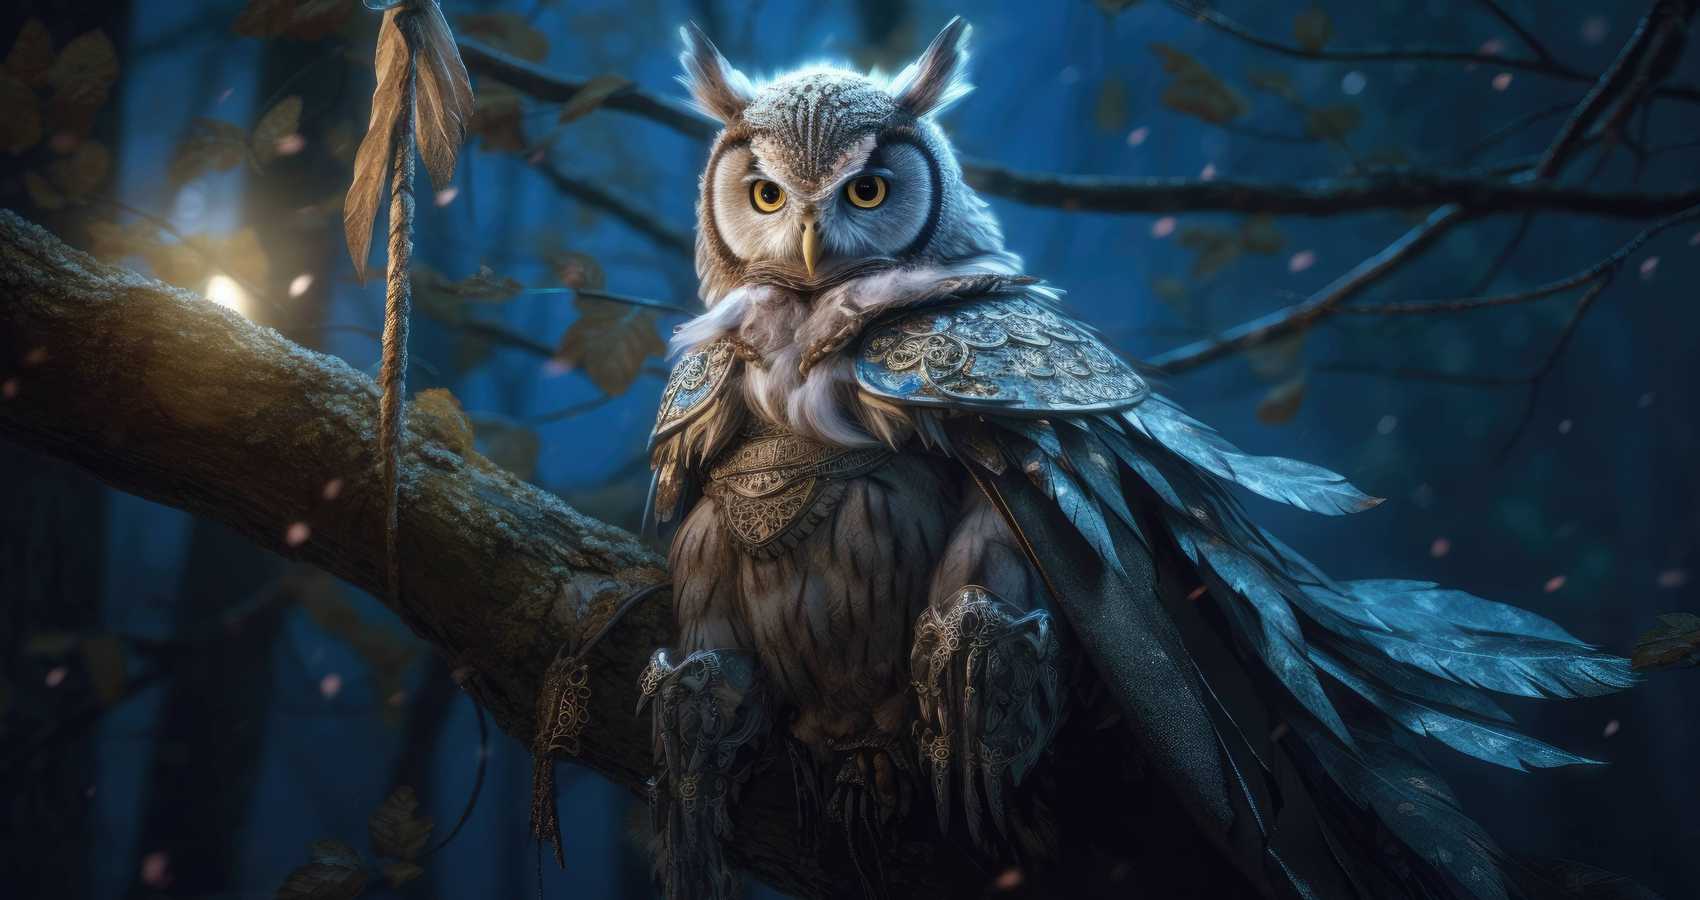 Chester The Warrior Owl, fiction by Author B.A. Rose at Spillwords.com